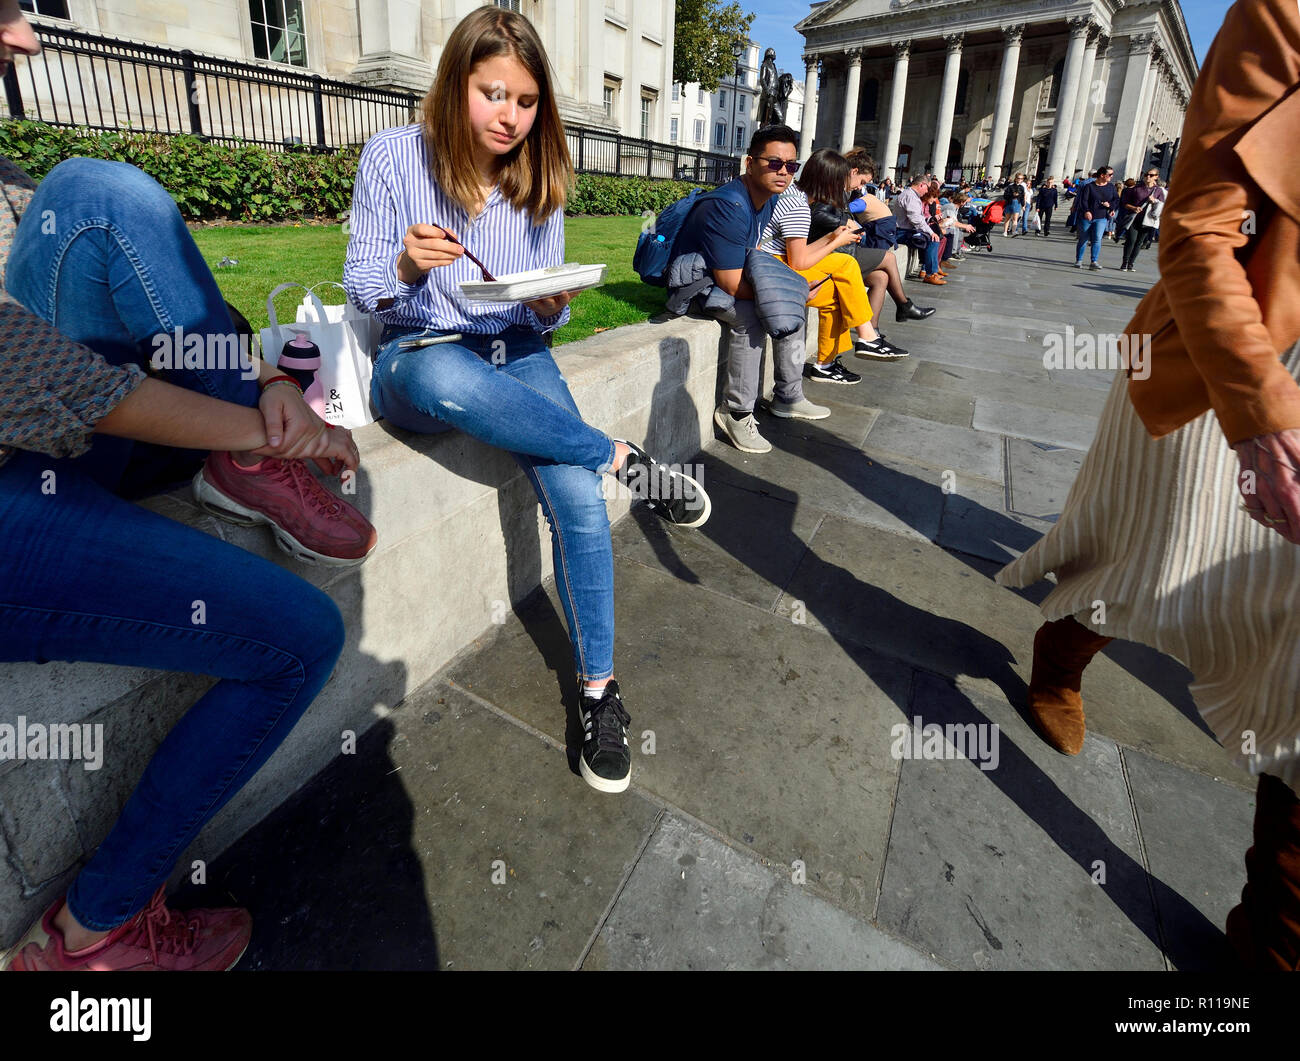 People relaxing at lunchtime in front of the National Gallery in Trafalgar Square, London, England, UK. Stock Photo